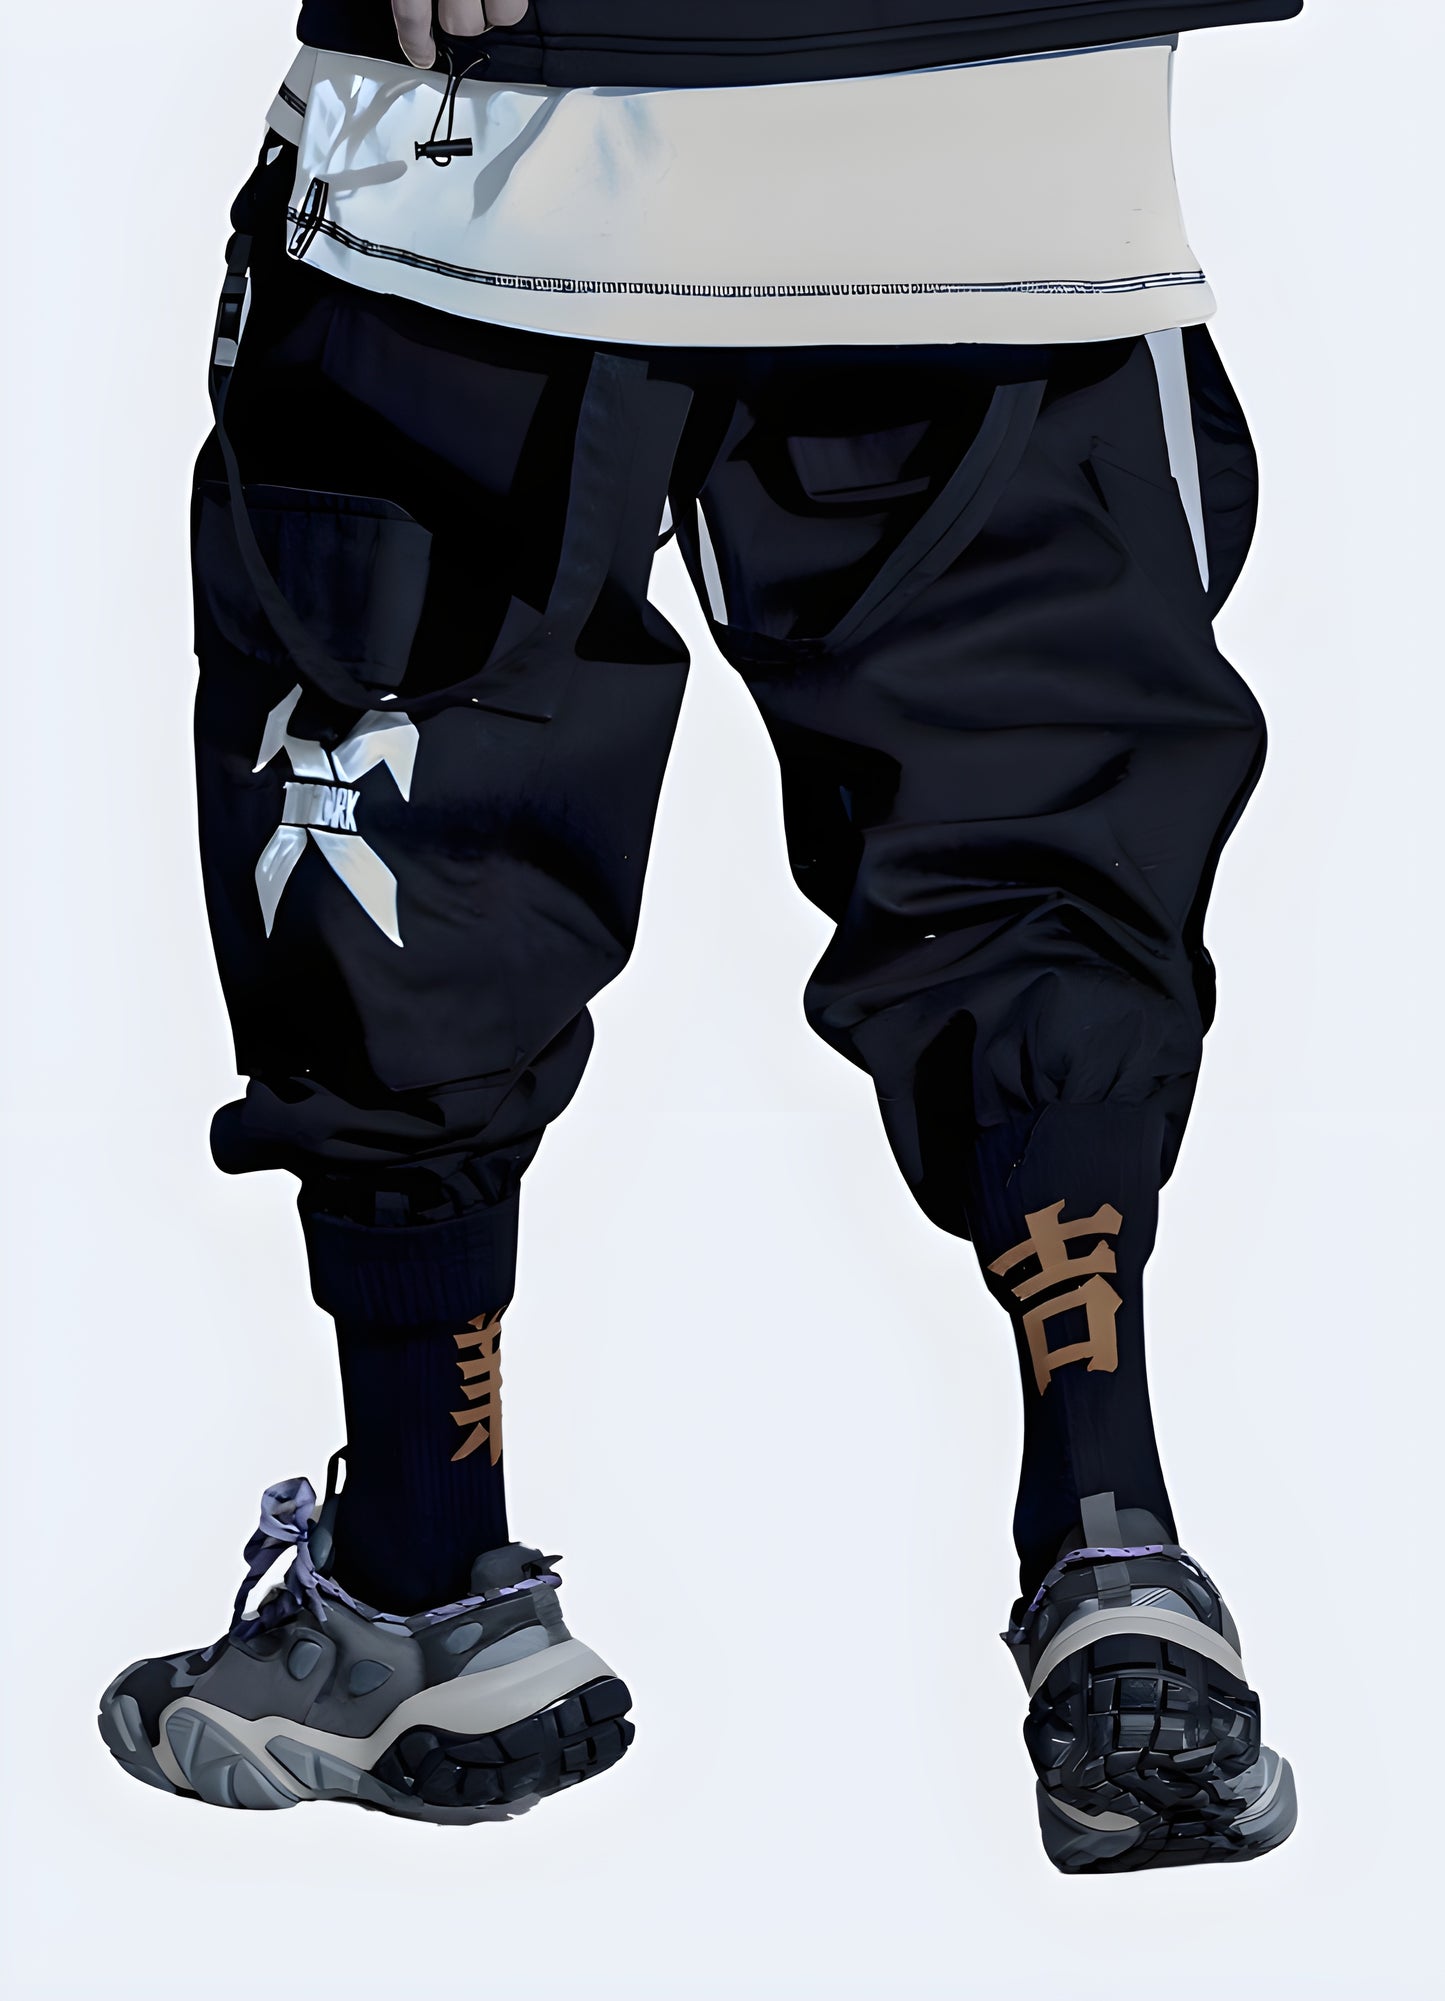 These Japanese techwear pants are your trusted companions for any journey.